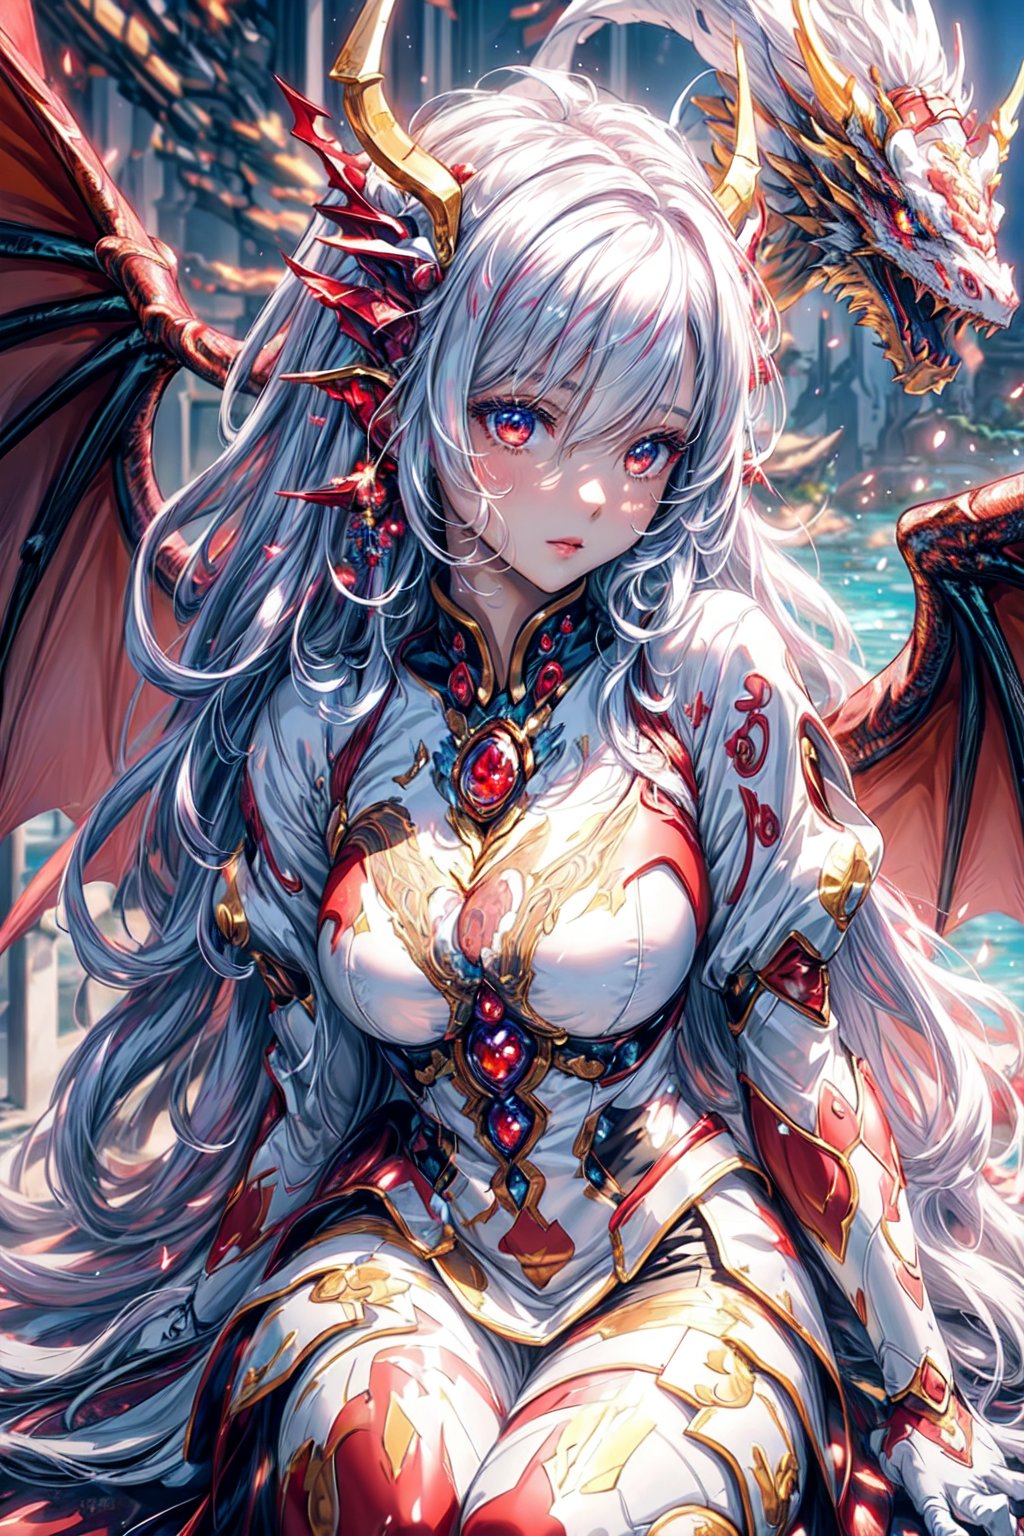 masterpiece, 1 girl, Extremely beautiful woman sitting at the edge of a lake with very large glowing dragon wings, glowing hair, long cascading hair, white hair with crimson highlights, crimson dress with white skirt, dawn, full lips, hyperdetailed face, detailed eyes, dynamic pose, cinematic lighting, perfect hands, dragon girl, girl with dragon wings, dark fantasy